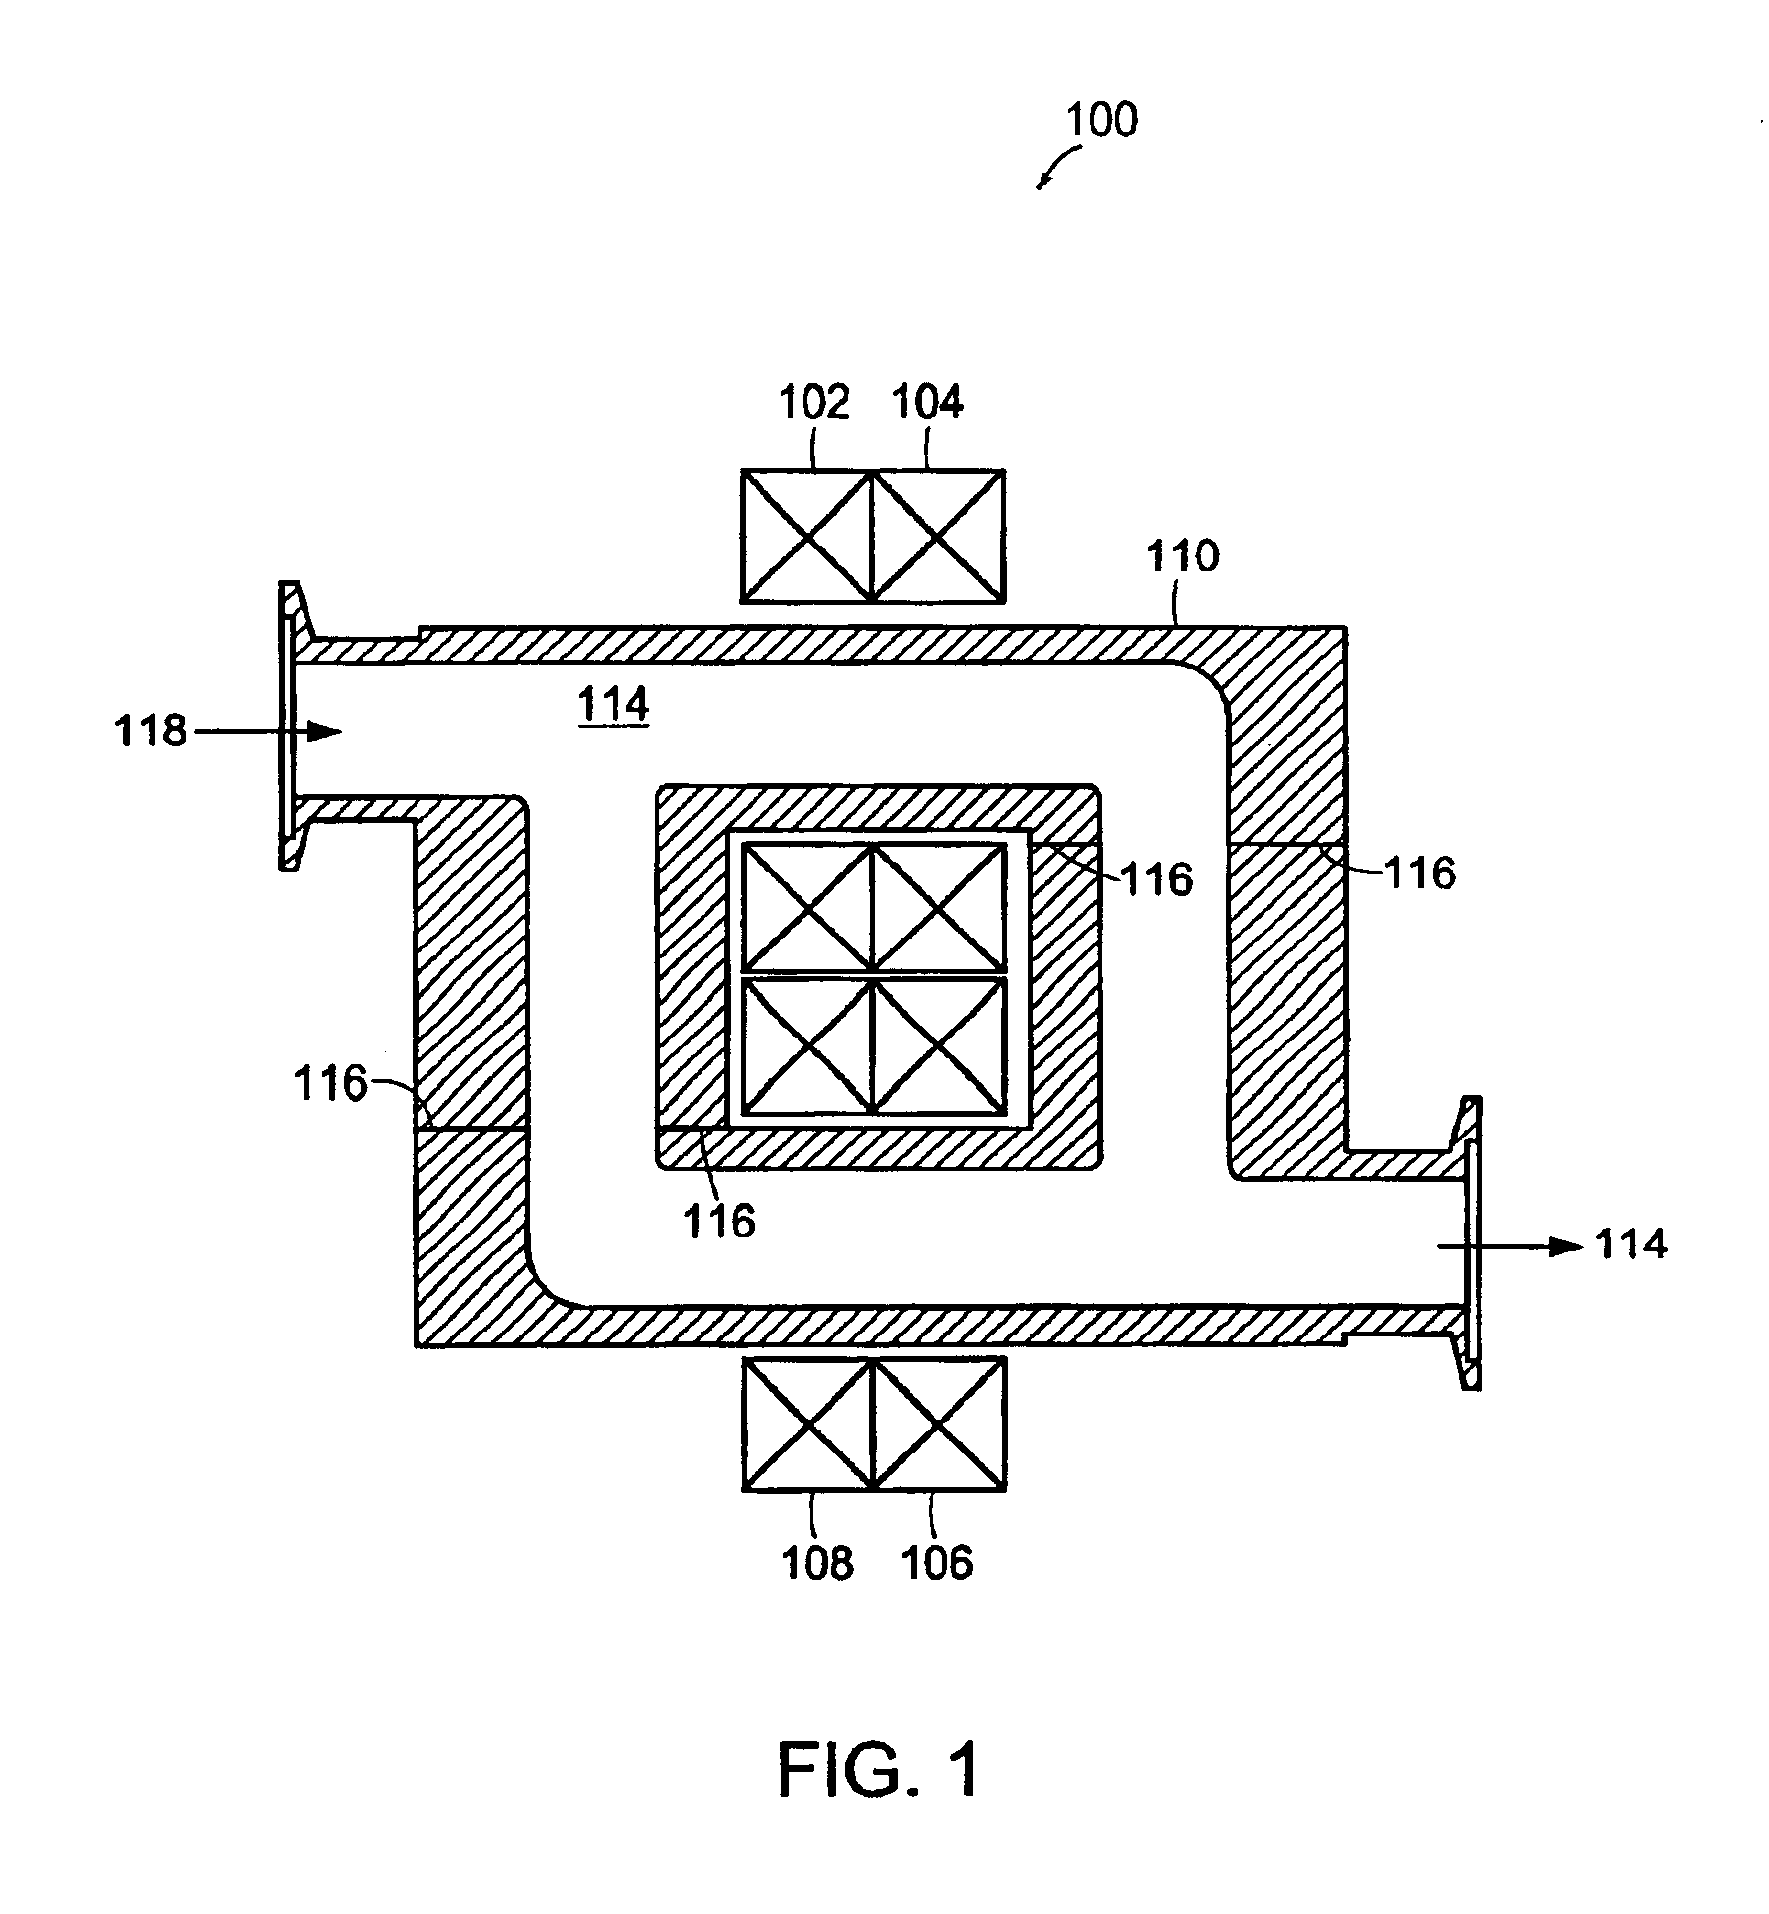 Toroidal low-field reactive gas and plasma source having a dielectric vacuum vessel